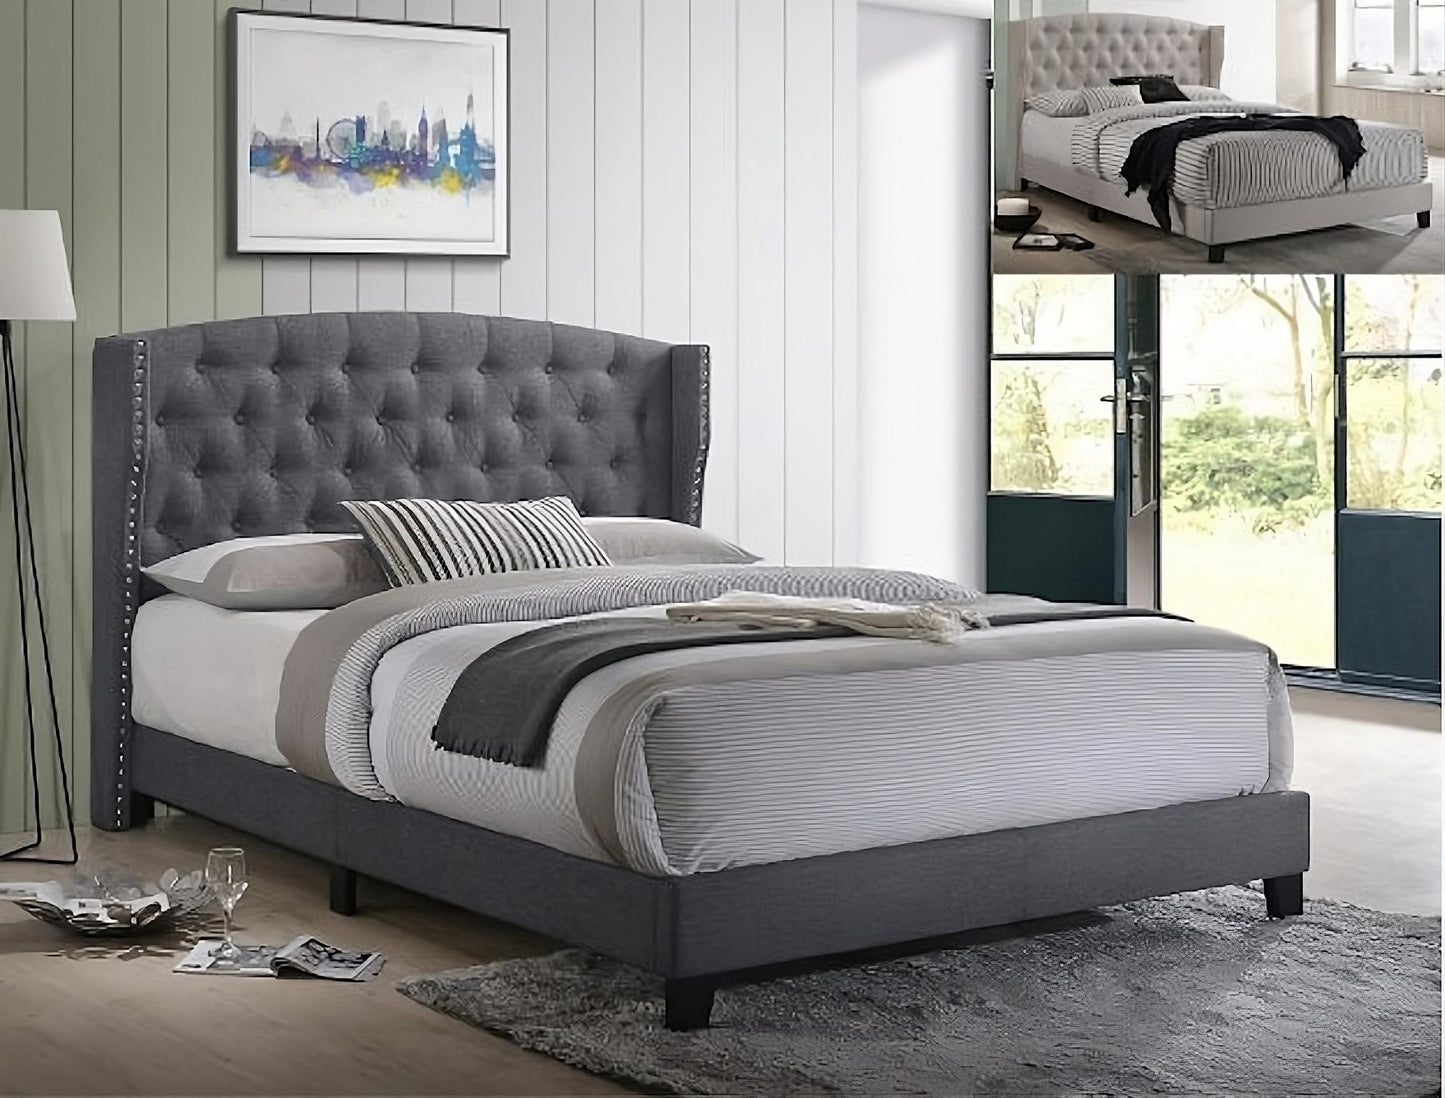 Modern Wing sleigh Bed With Matching Headboard | Footboard - rn interiors